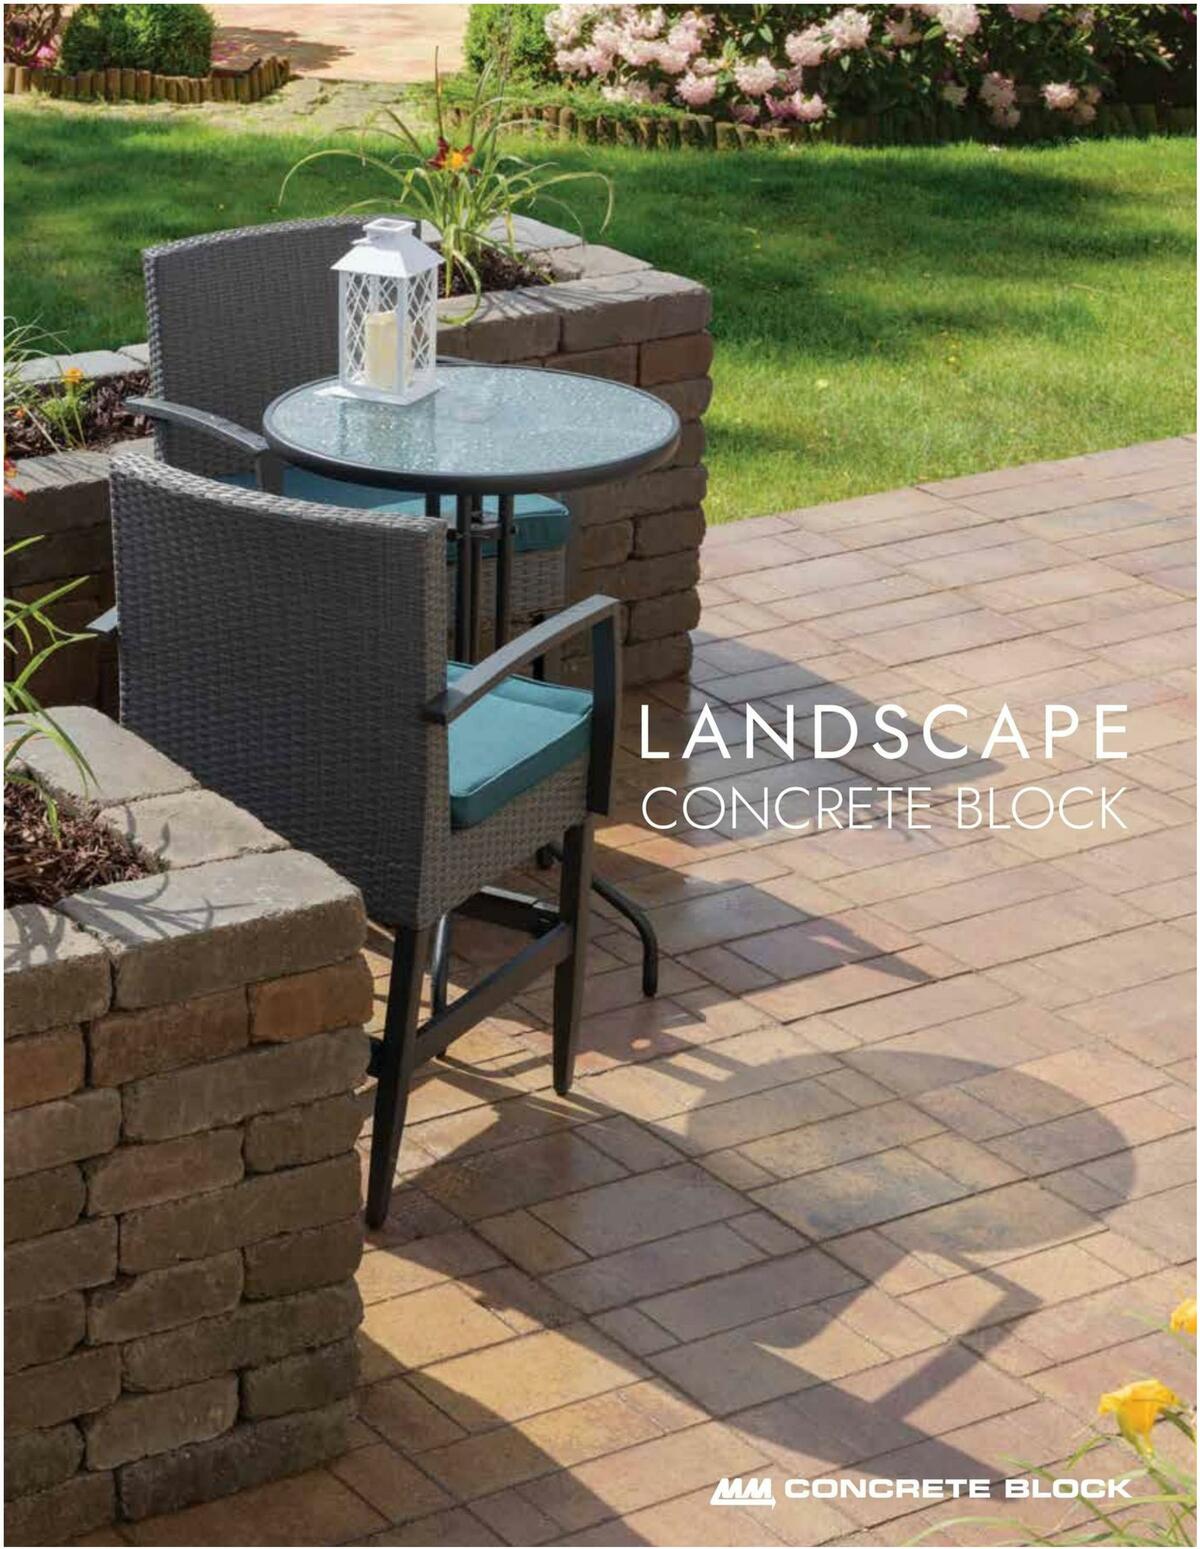 Menards Landscape Concrete Block Catalog Weekly Ads & Special Buys from